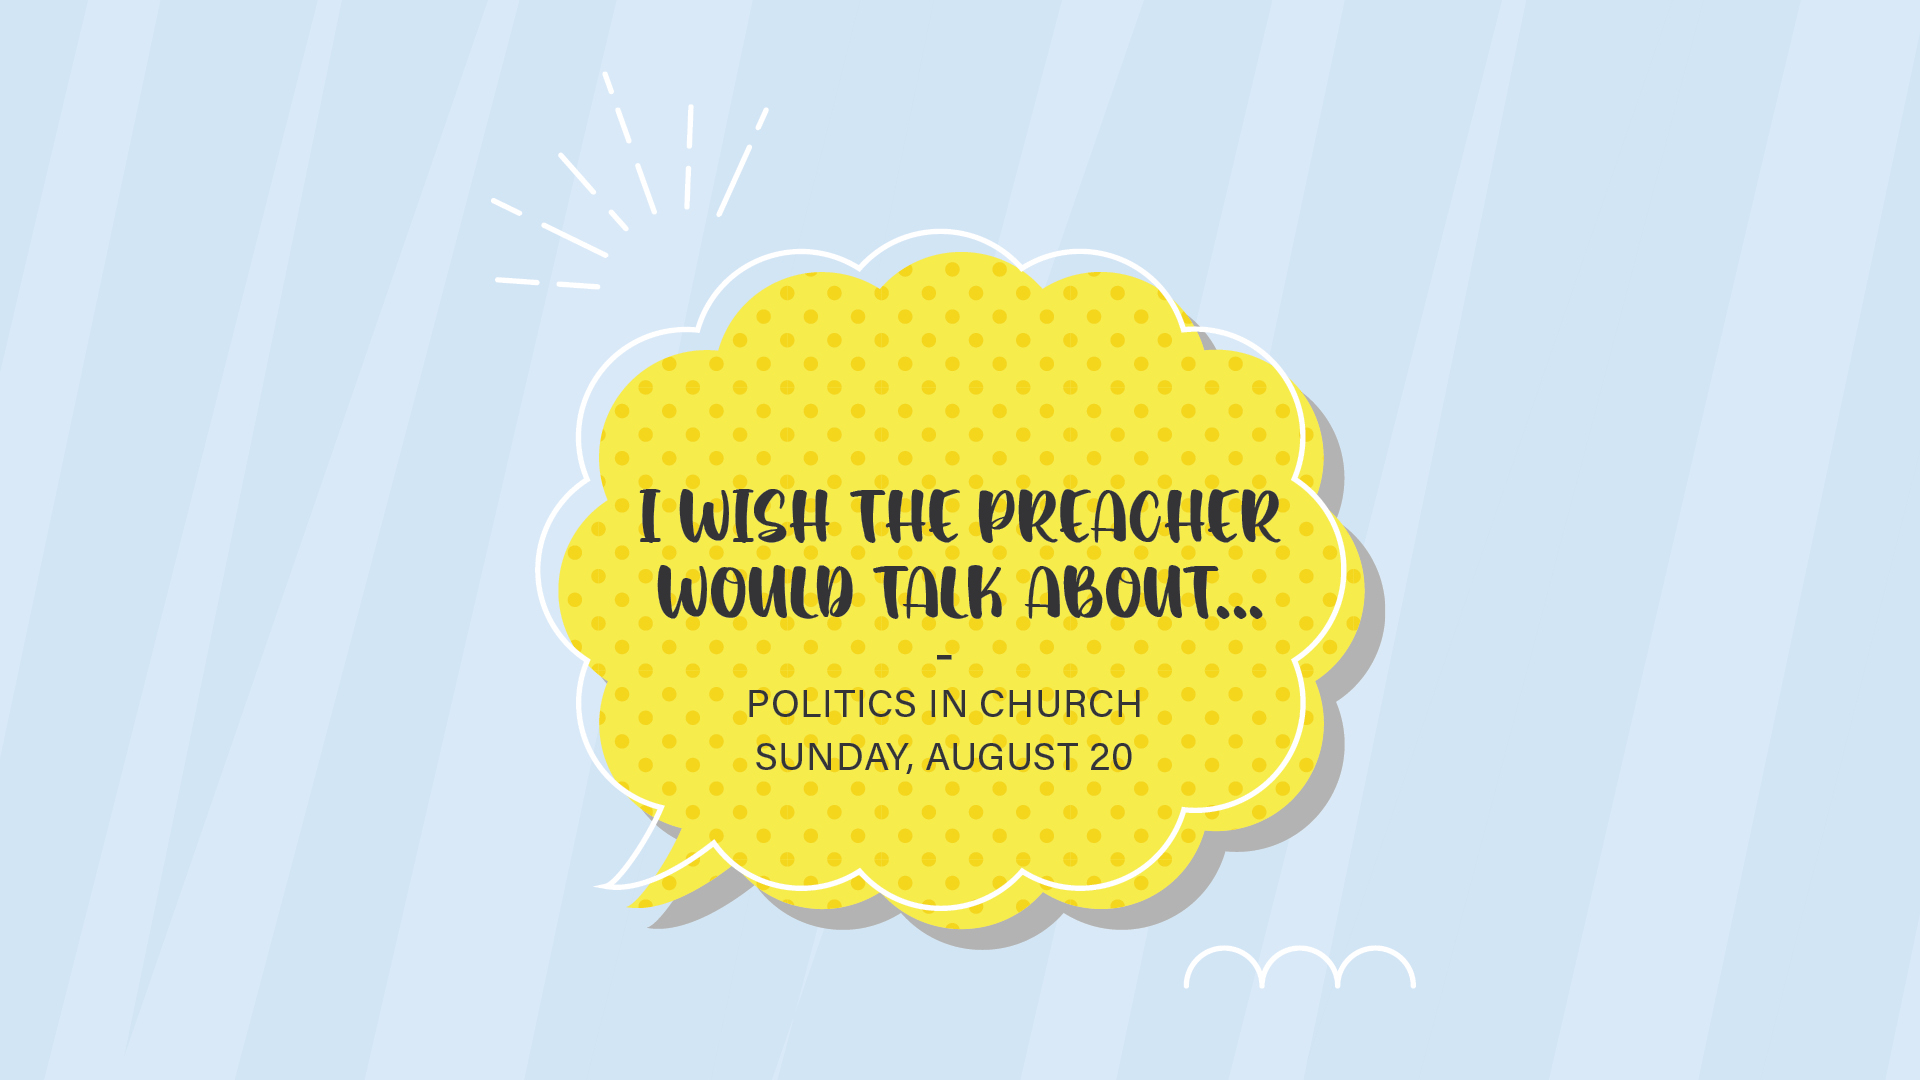 I Wish the Preacher Would Talk About: Politics in Church